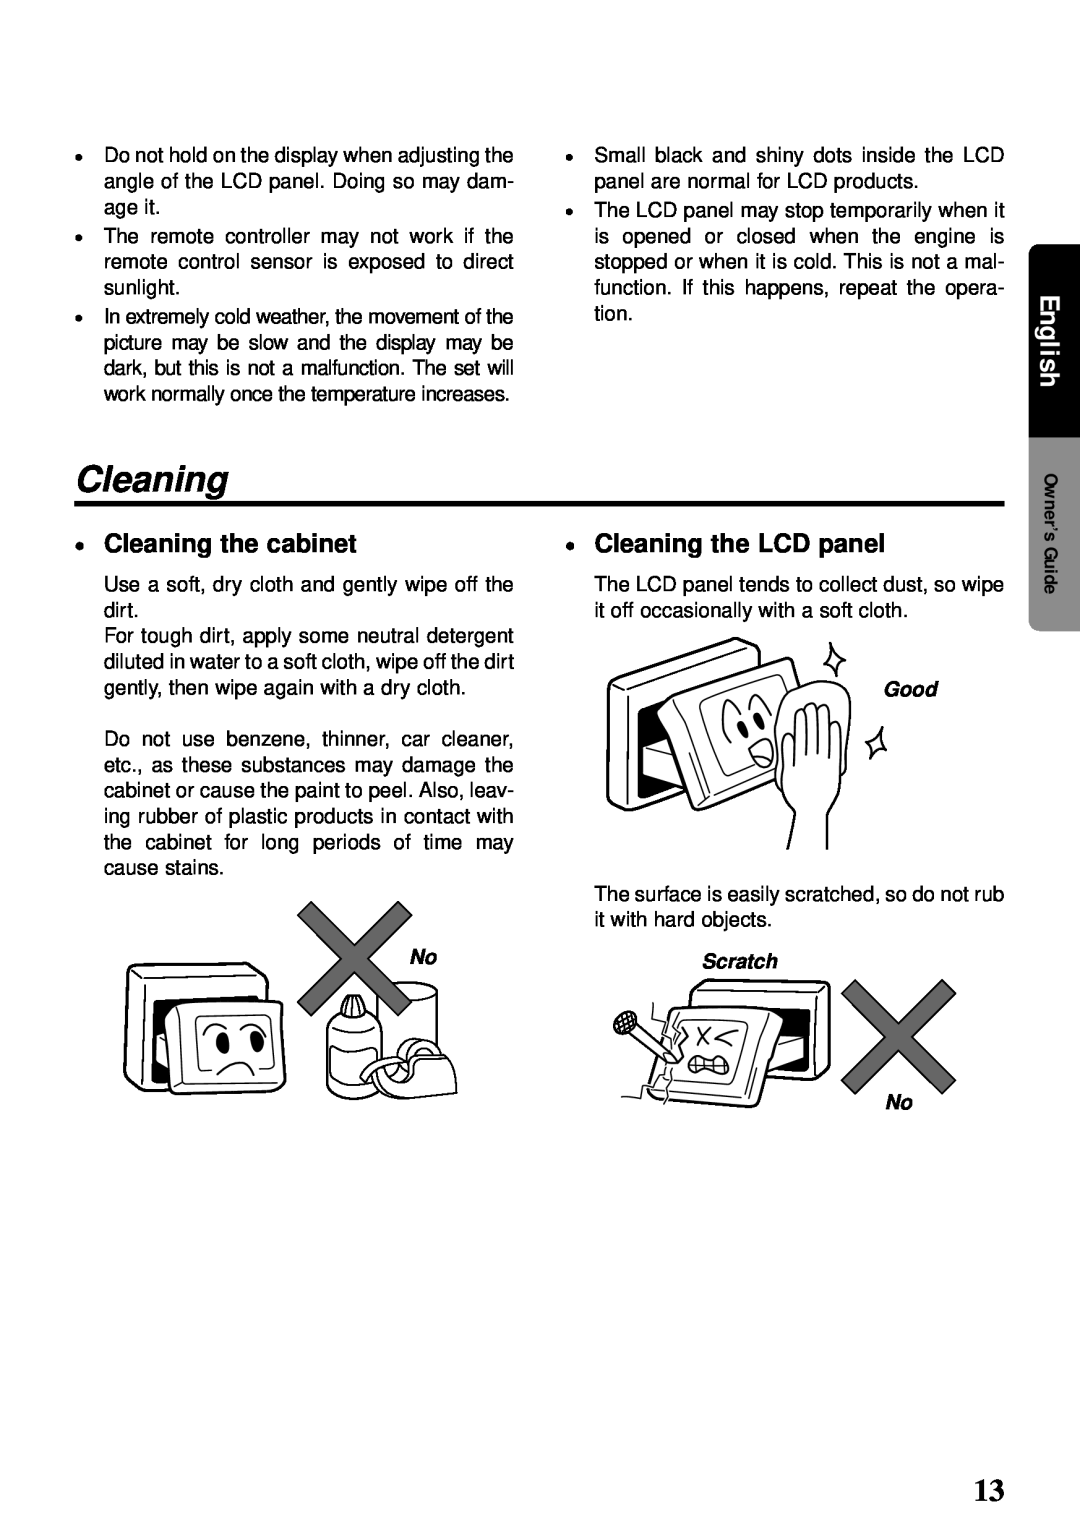 Clarion compact disc manual Cleaning the cabinet, Cleaning the LCD panel, Good, English 